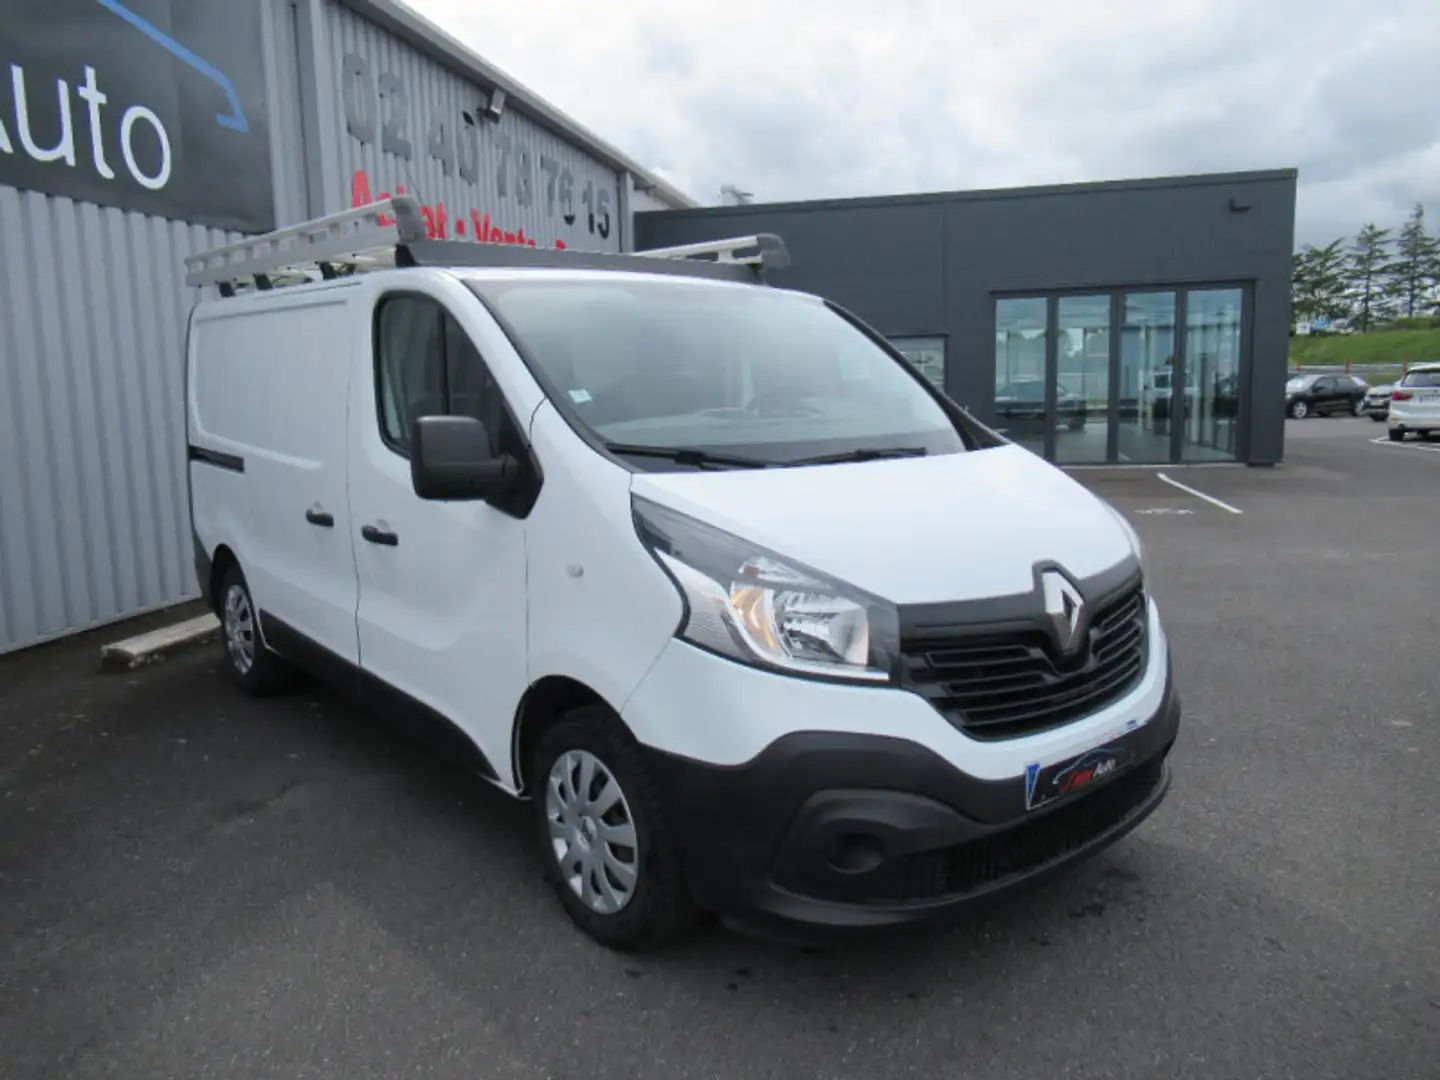 Renault Trafic L1H1 1200 1.6 DCI 125CH ENERGY GRAND CONFORT EURO6 - 2